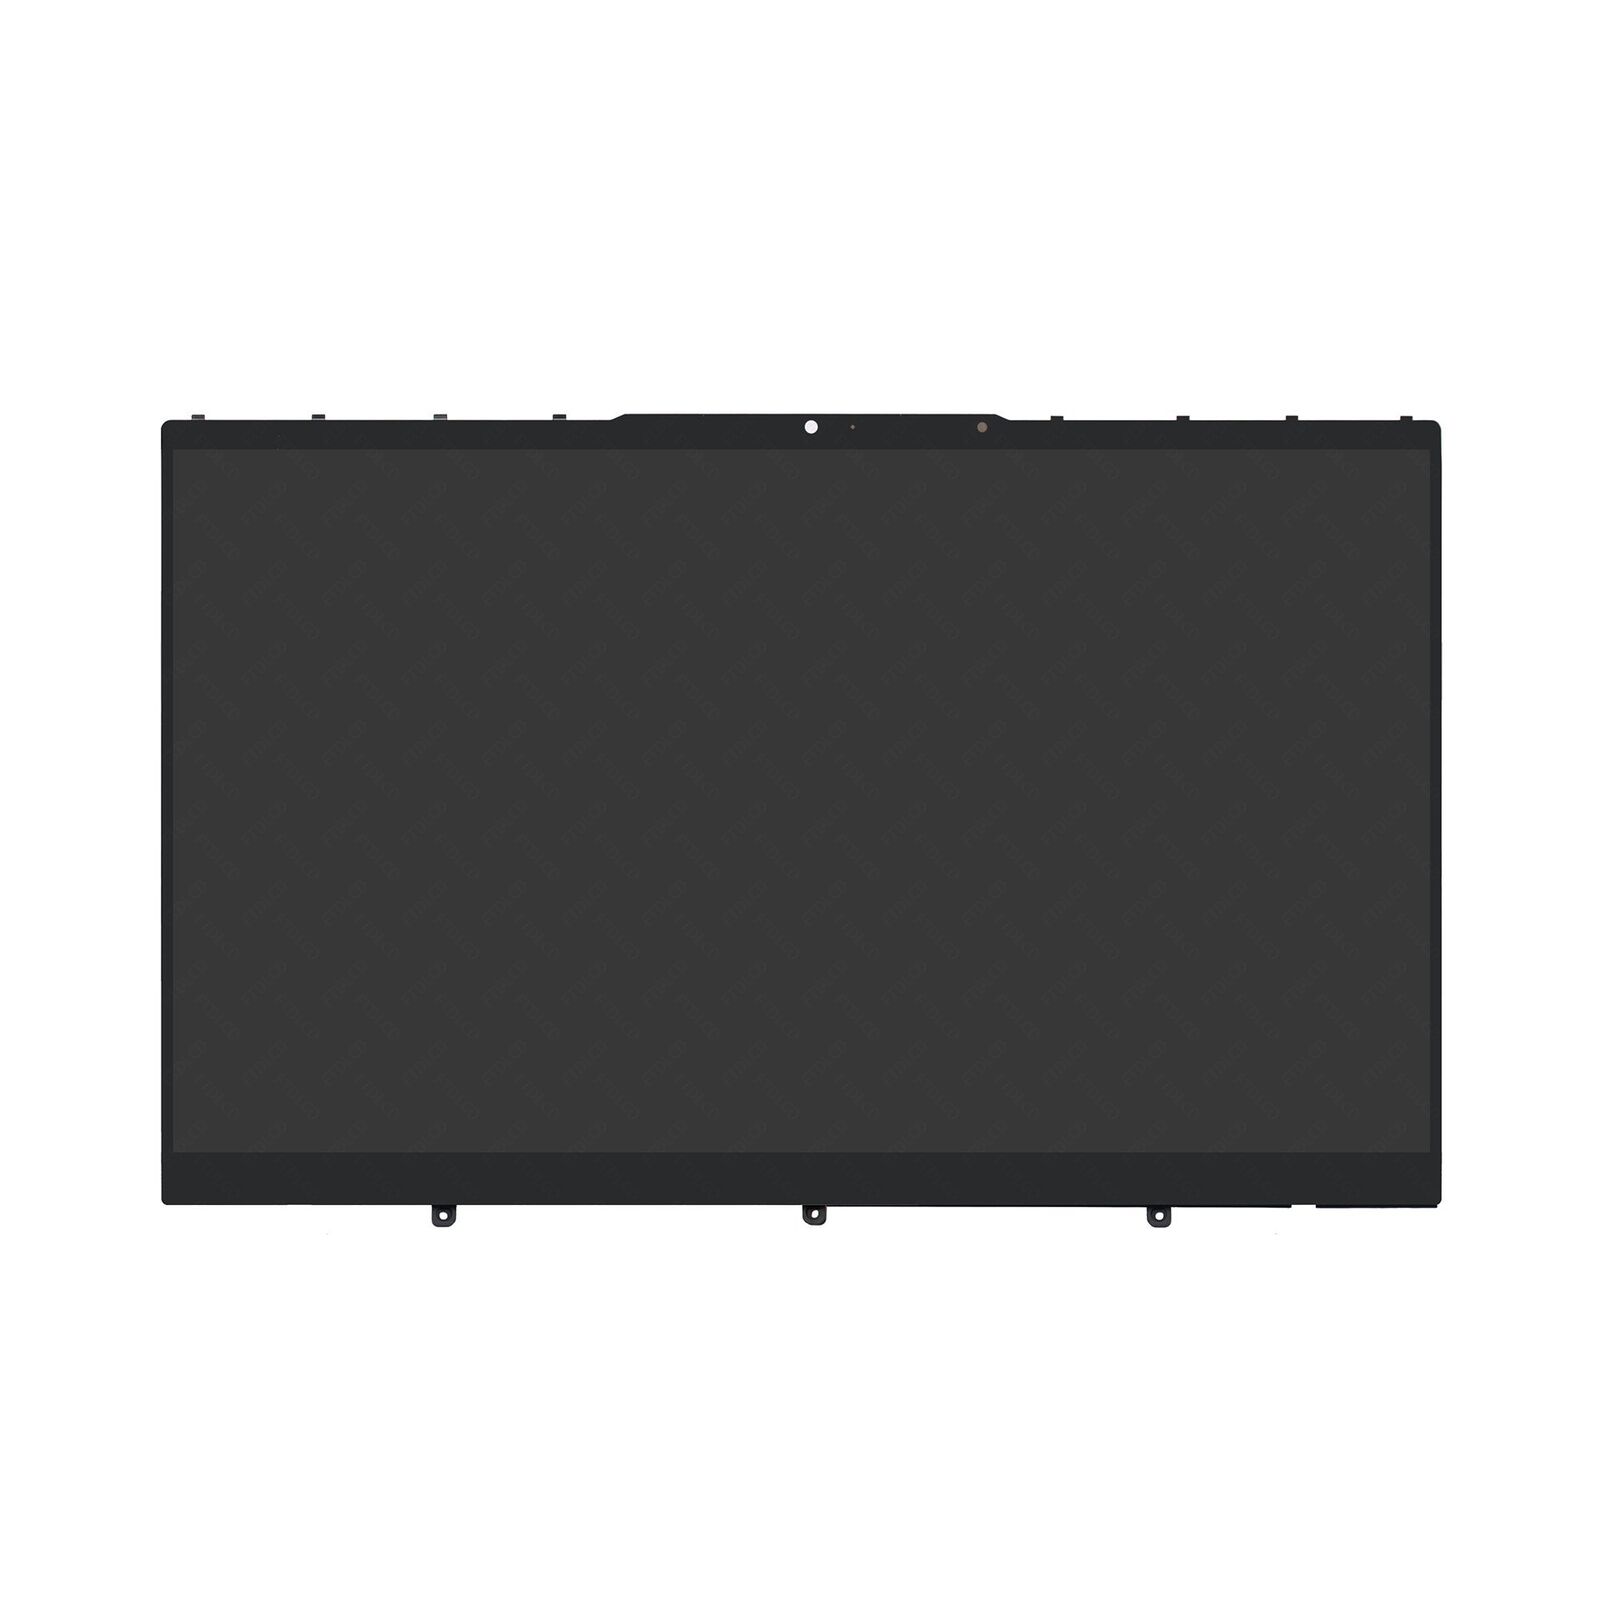 5D10S39670 FHD IPS LCD Touchscreen Assembly for Lenovo Yoga 7i 14ITL5 82BH0002US